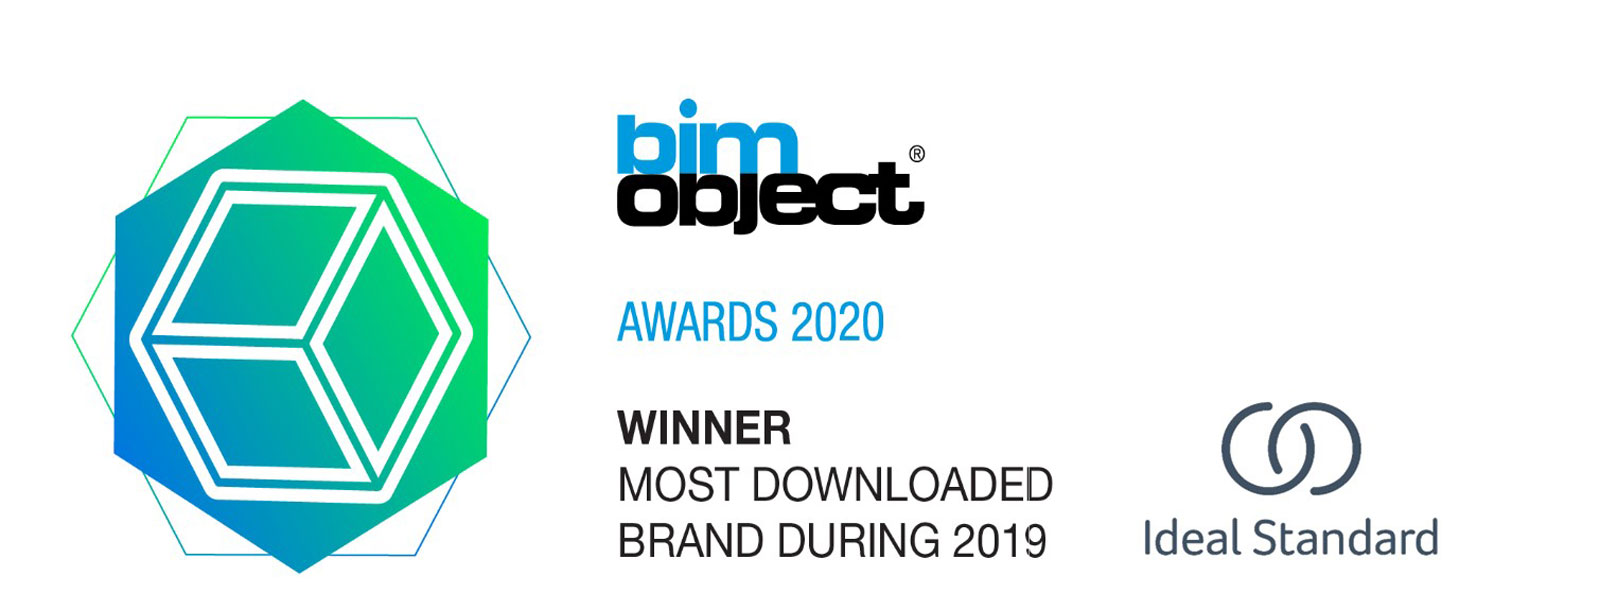 Archisearch Ideal Standard awarded ‘Most downloaded brand’ at BIMOBJECT AWARDS 2020